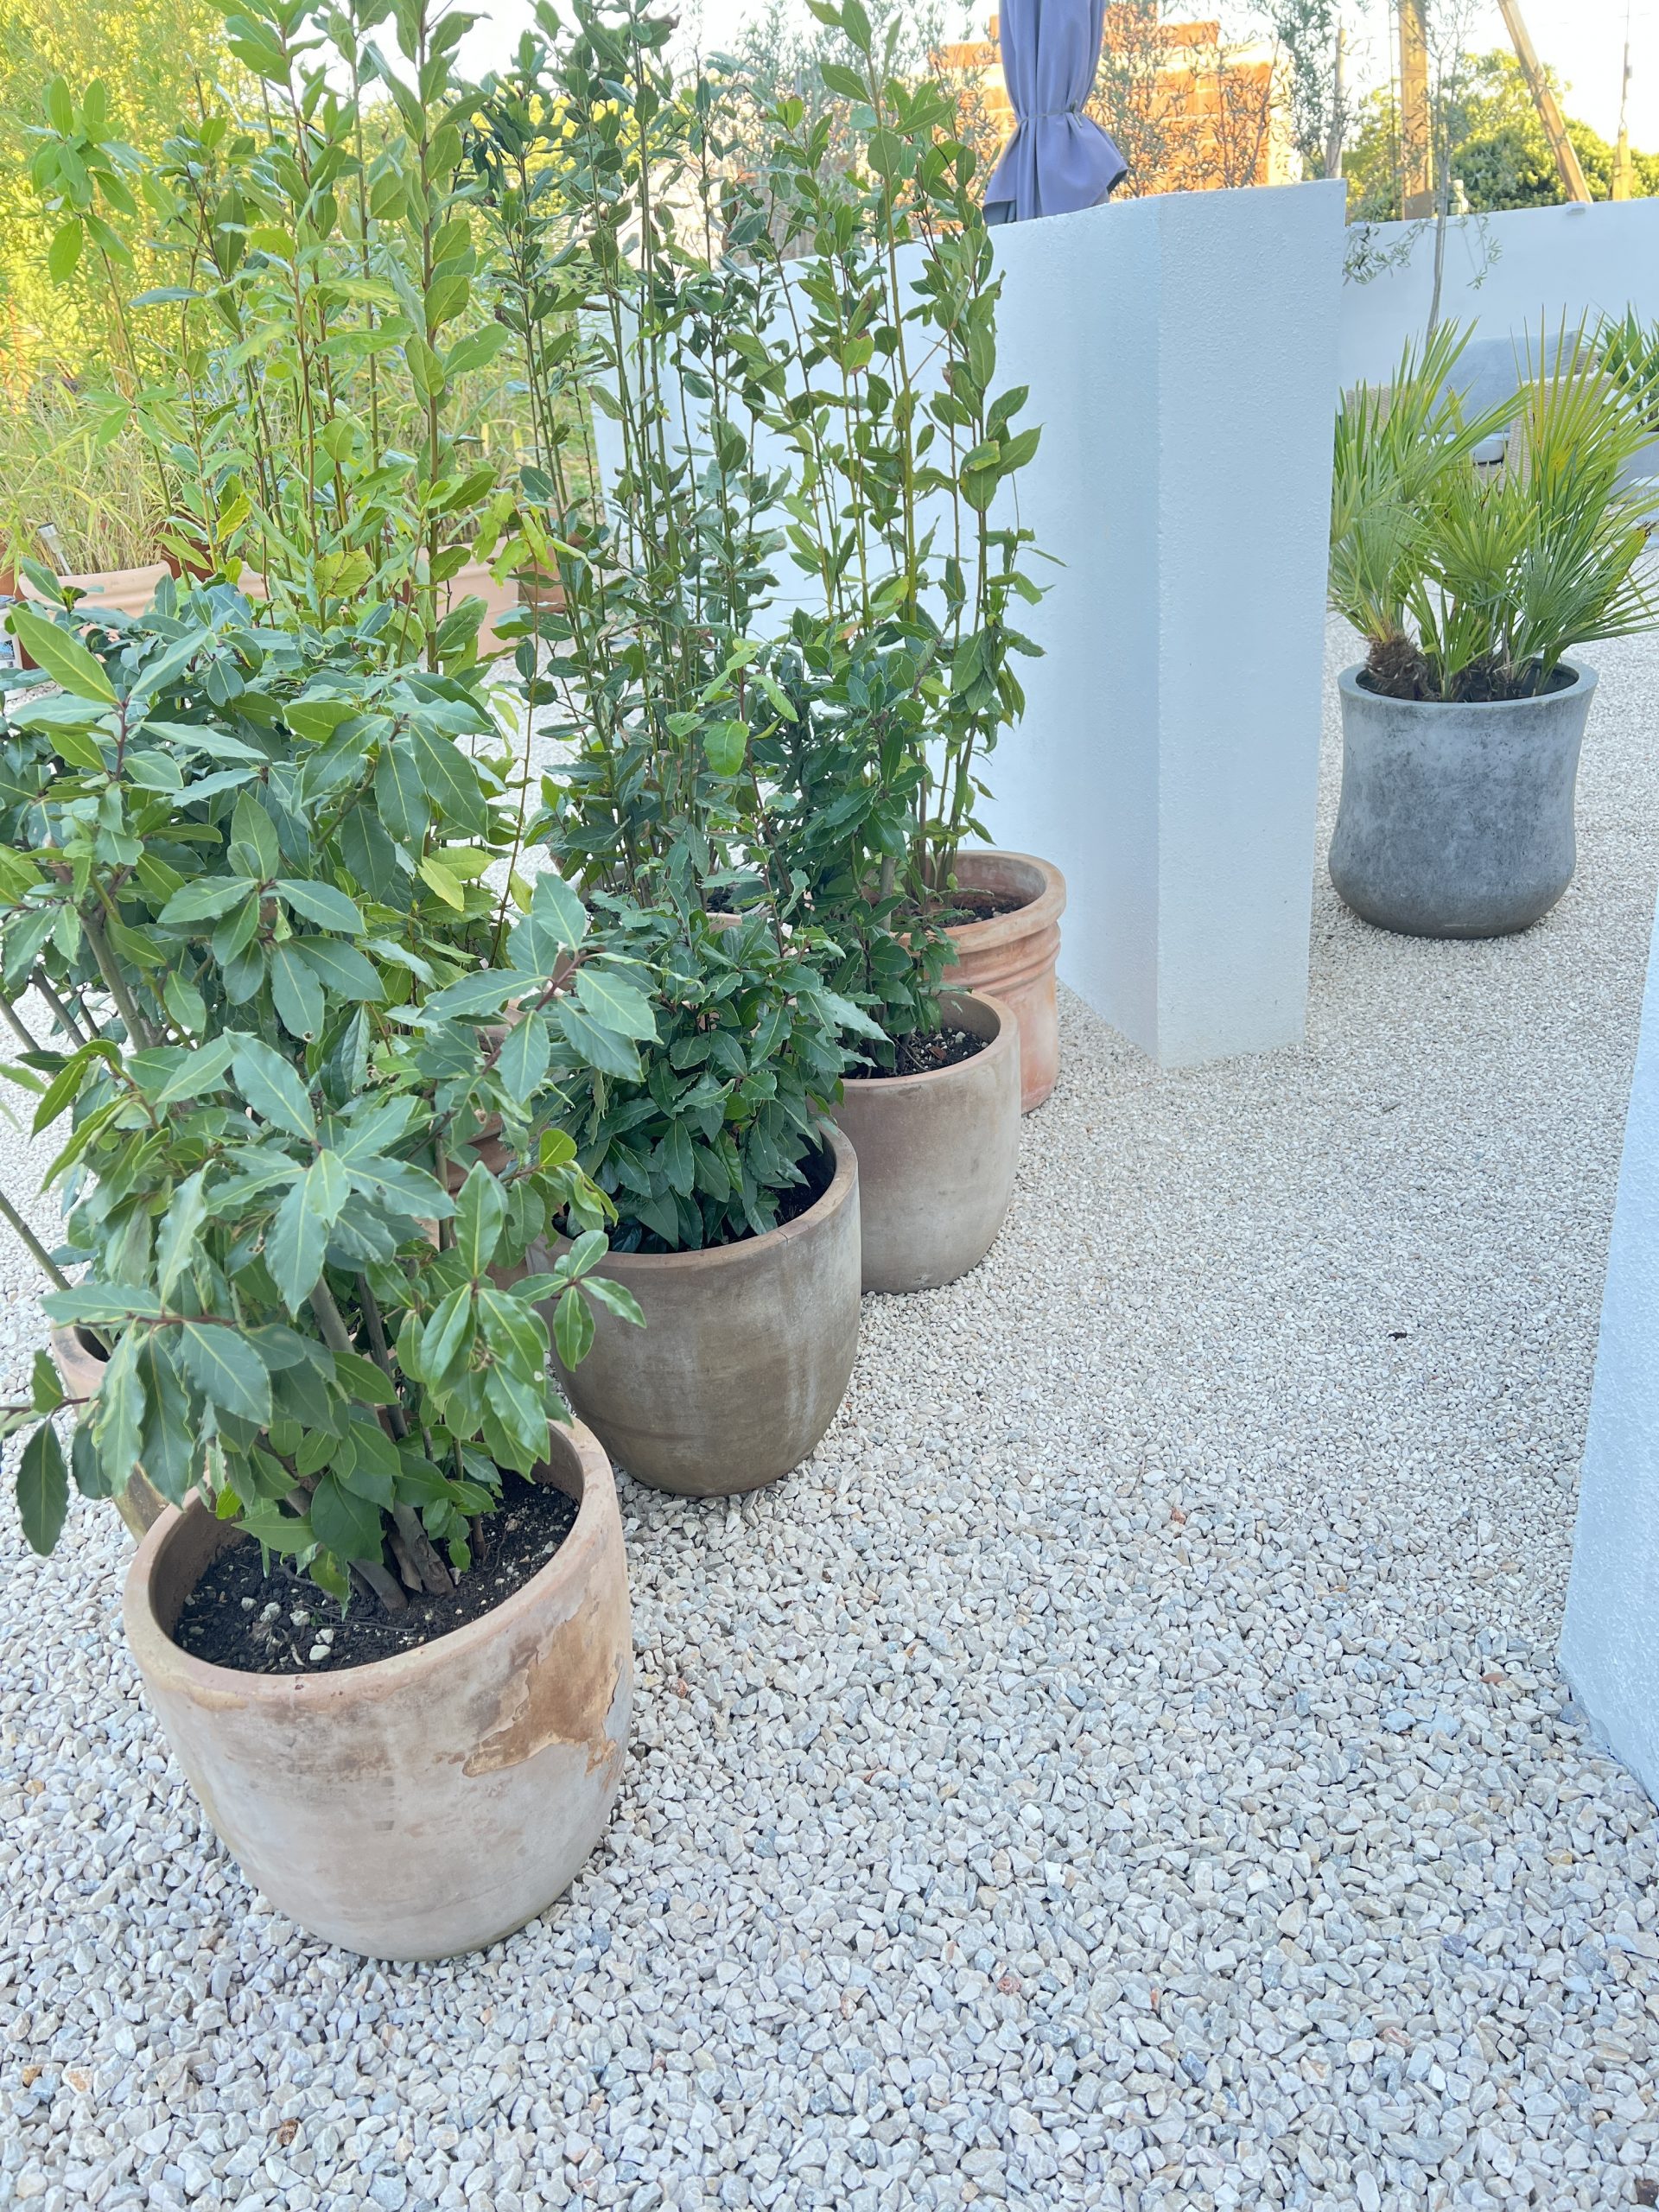 Potted bay trees